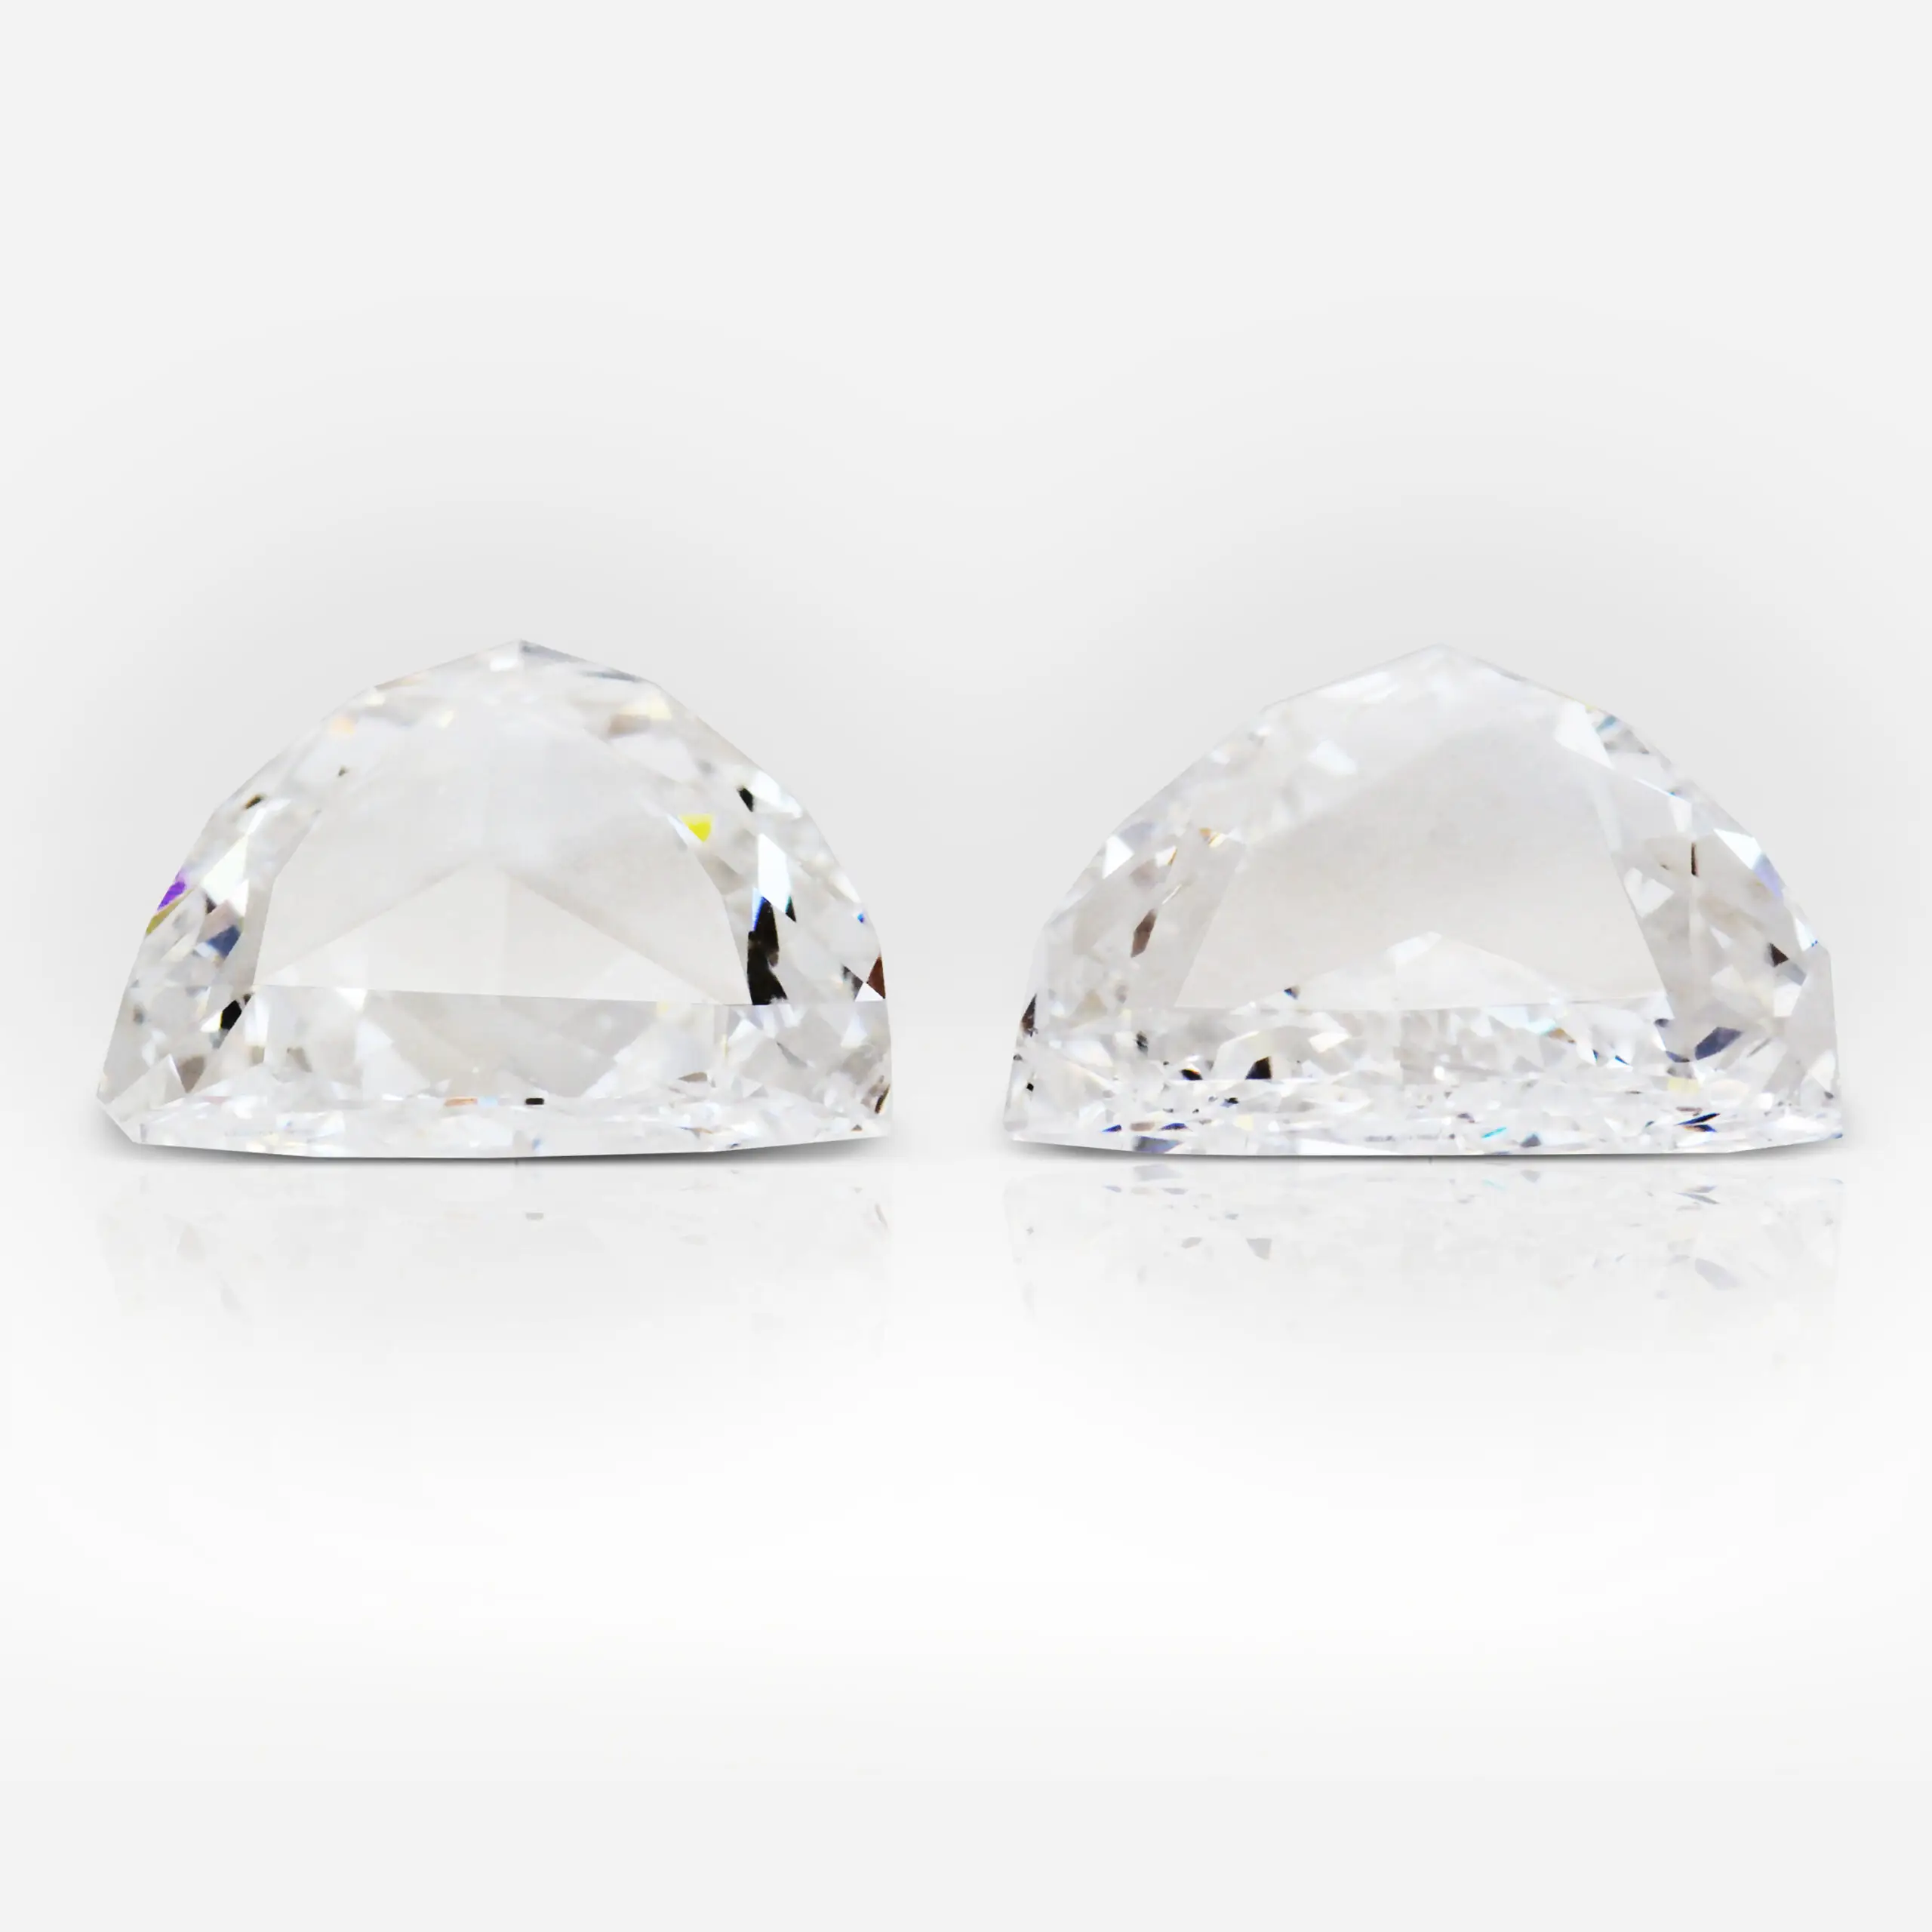 1.37 and 1.53 carat Pair of F / G SI1 Shield Shape Diamonds - picture 1